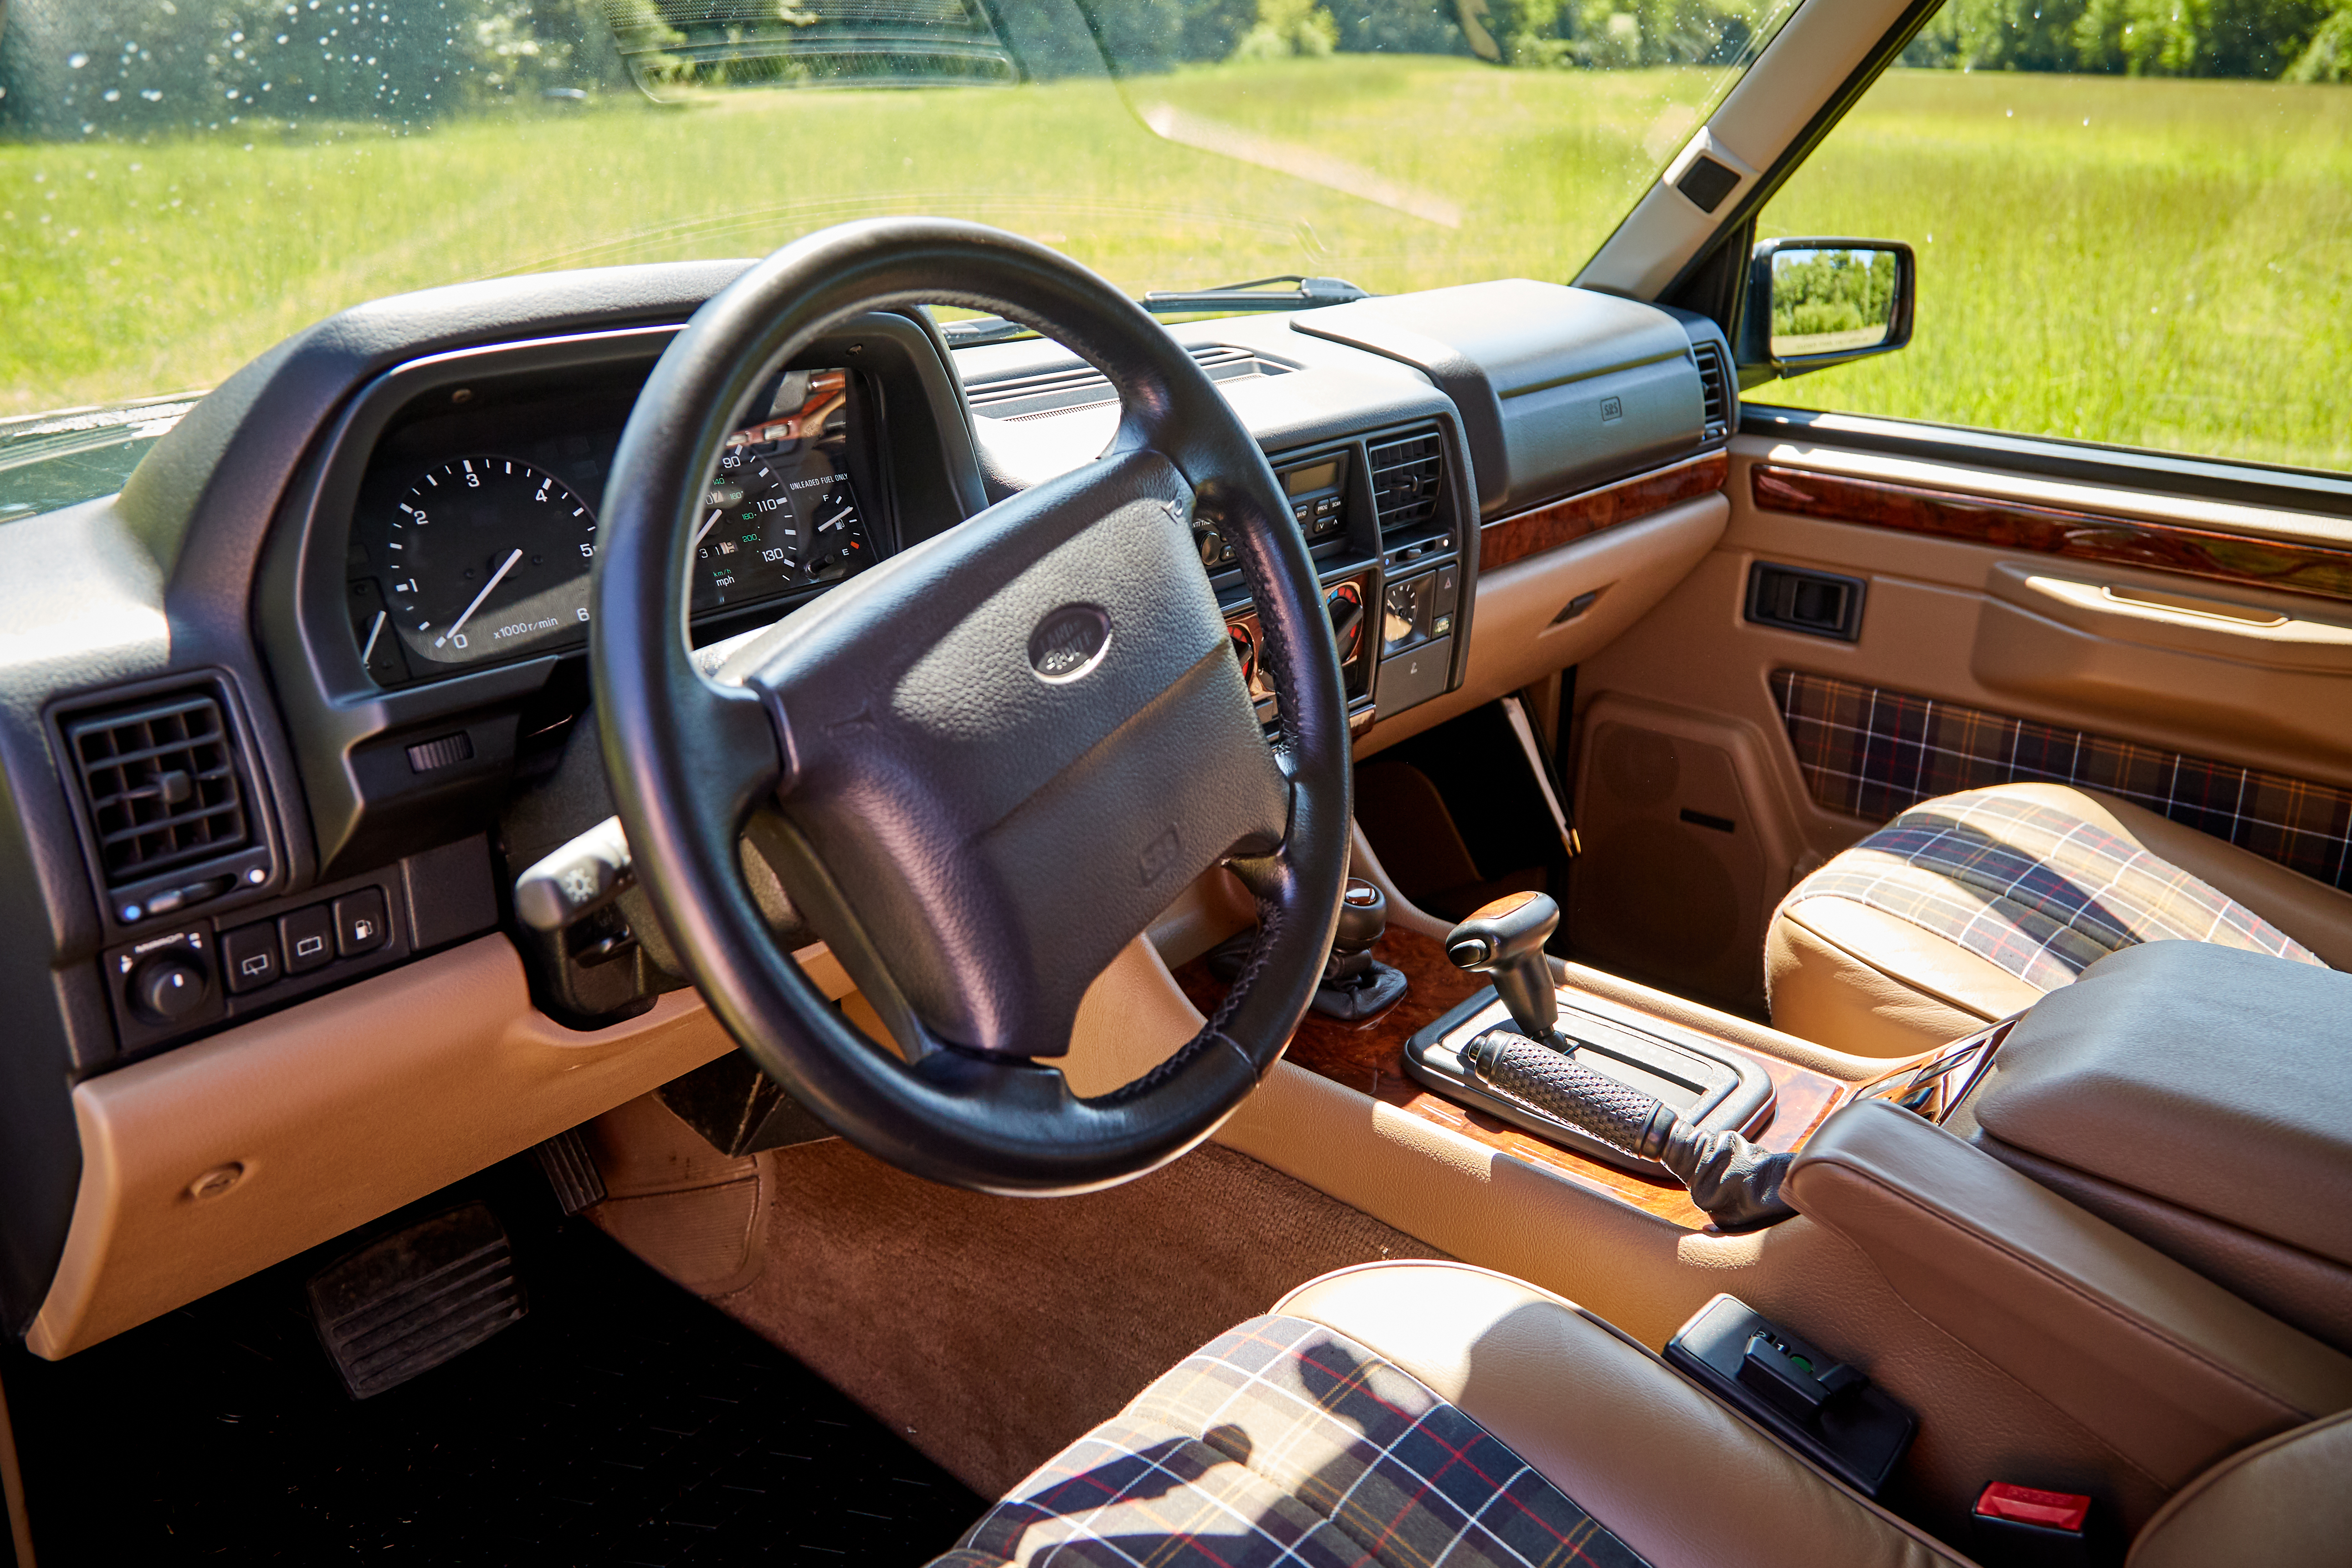 Barbour And Orvis Team Up For The Vintage Range Rover Of